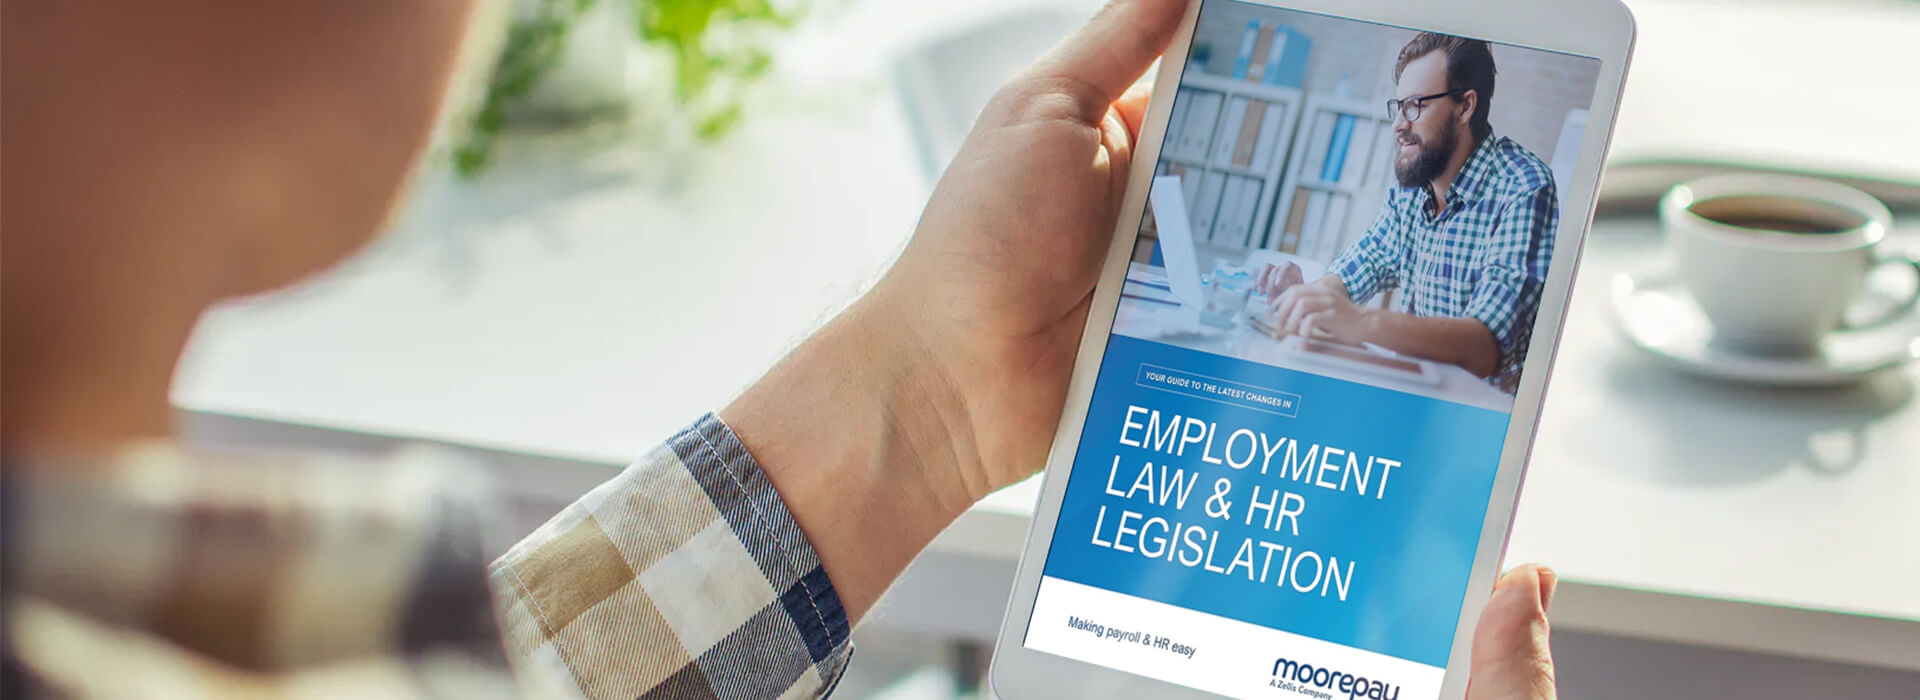 employment law guide download